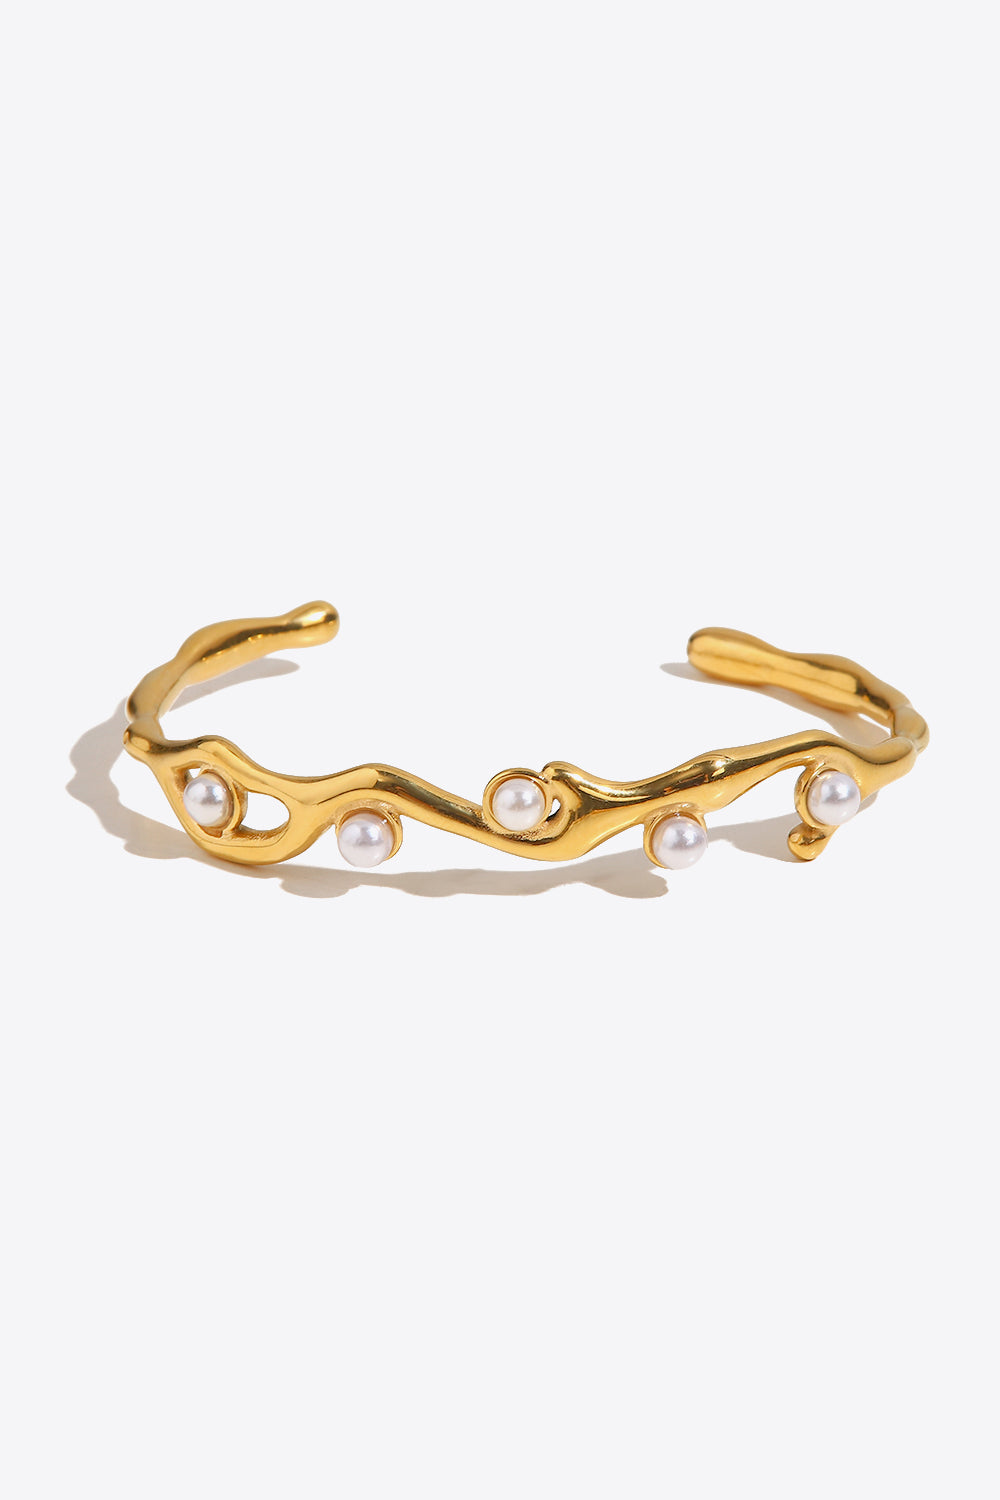 Inlaid Synthetic Pearl Open Bracelet - Bracelets - FITGGINS